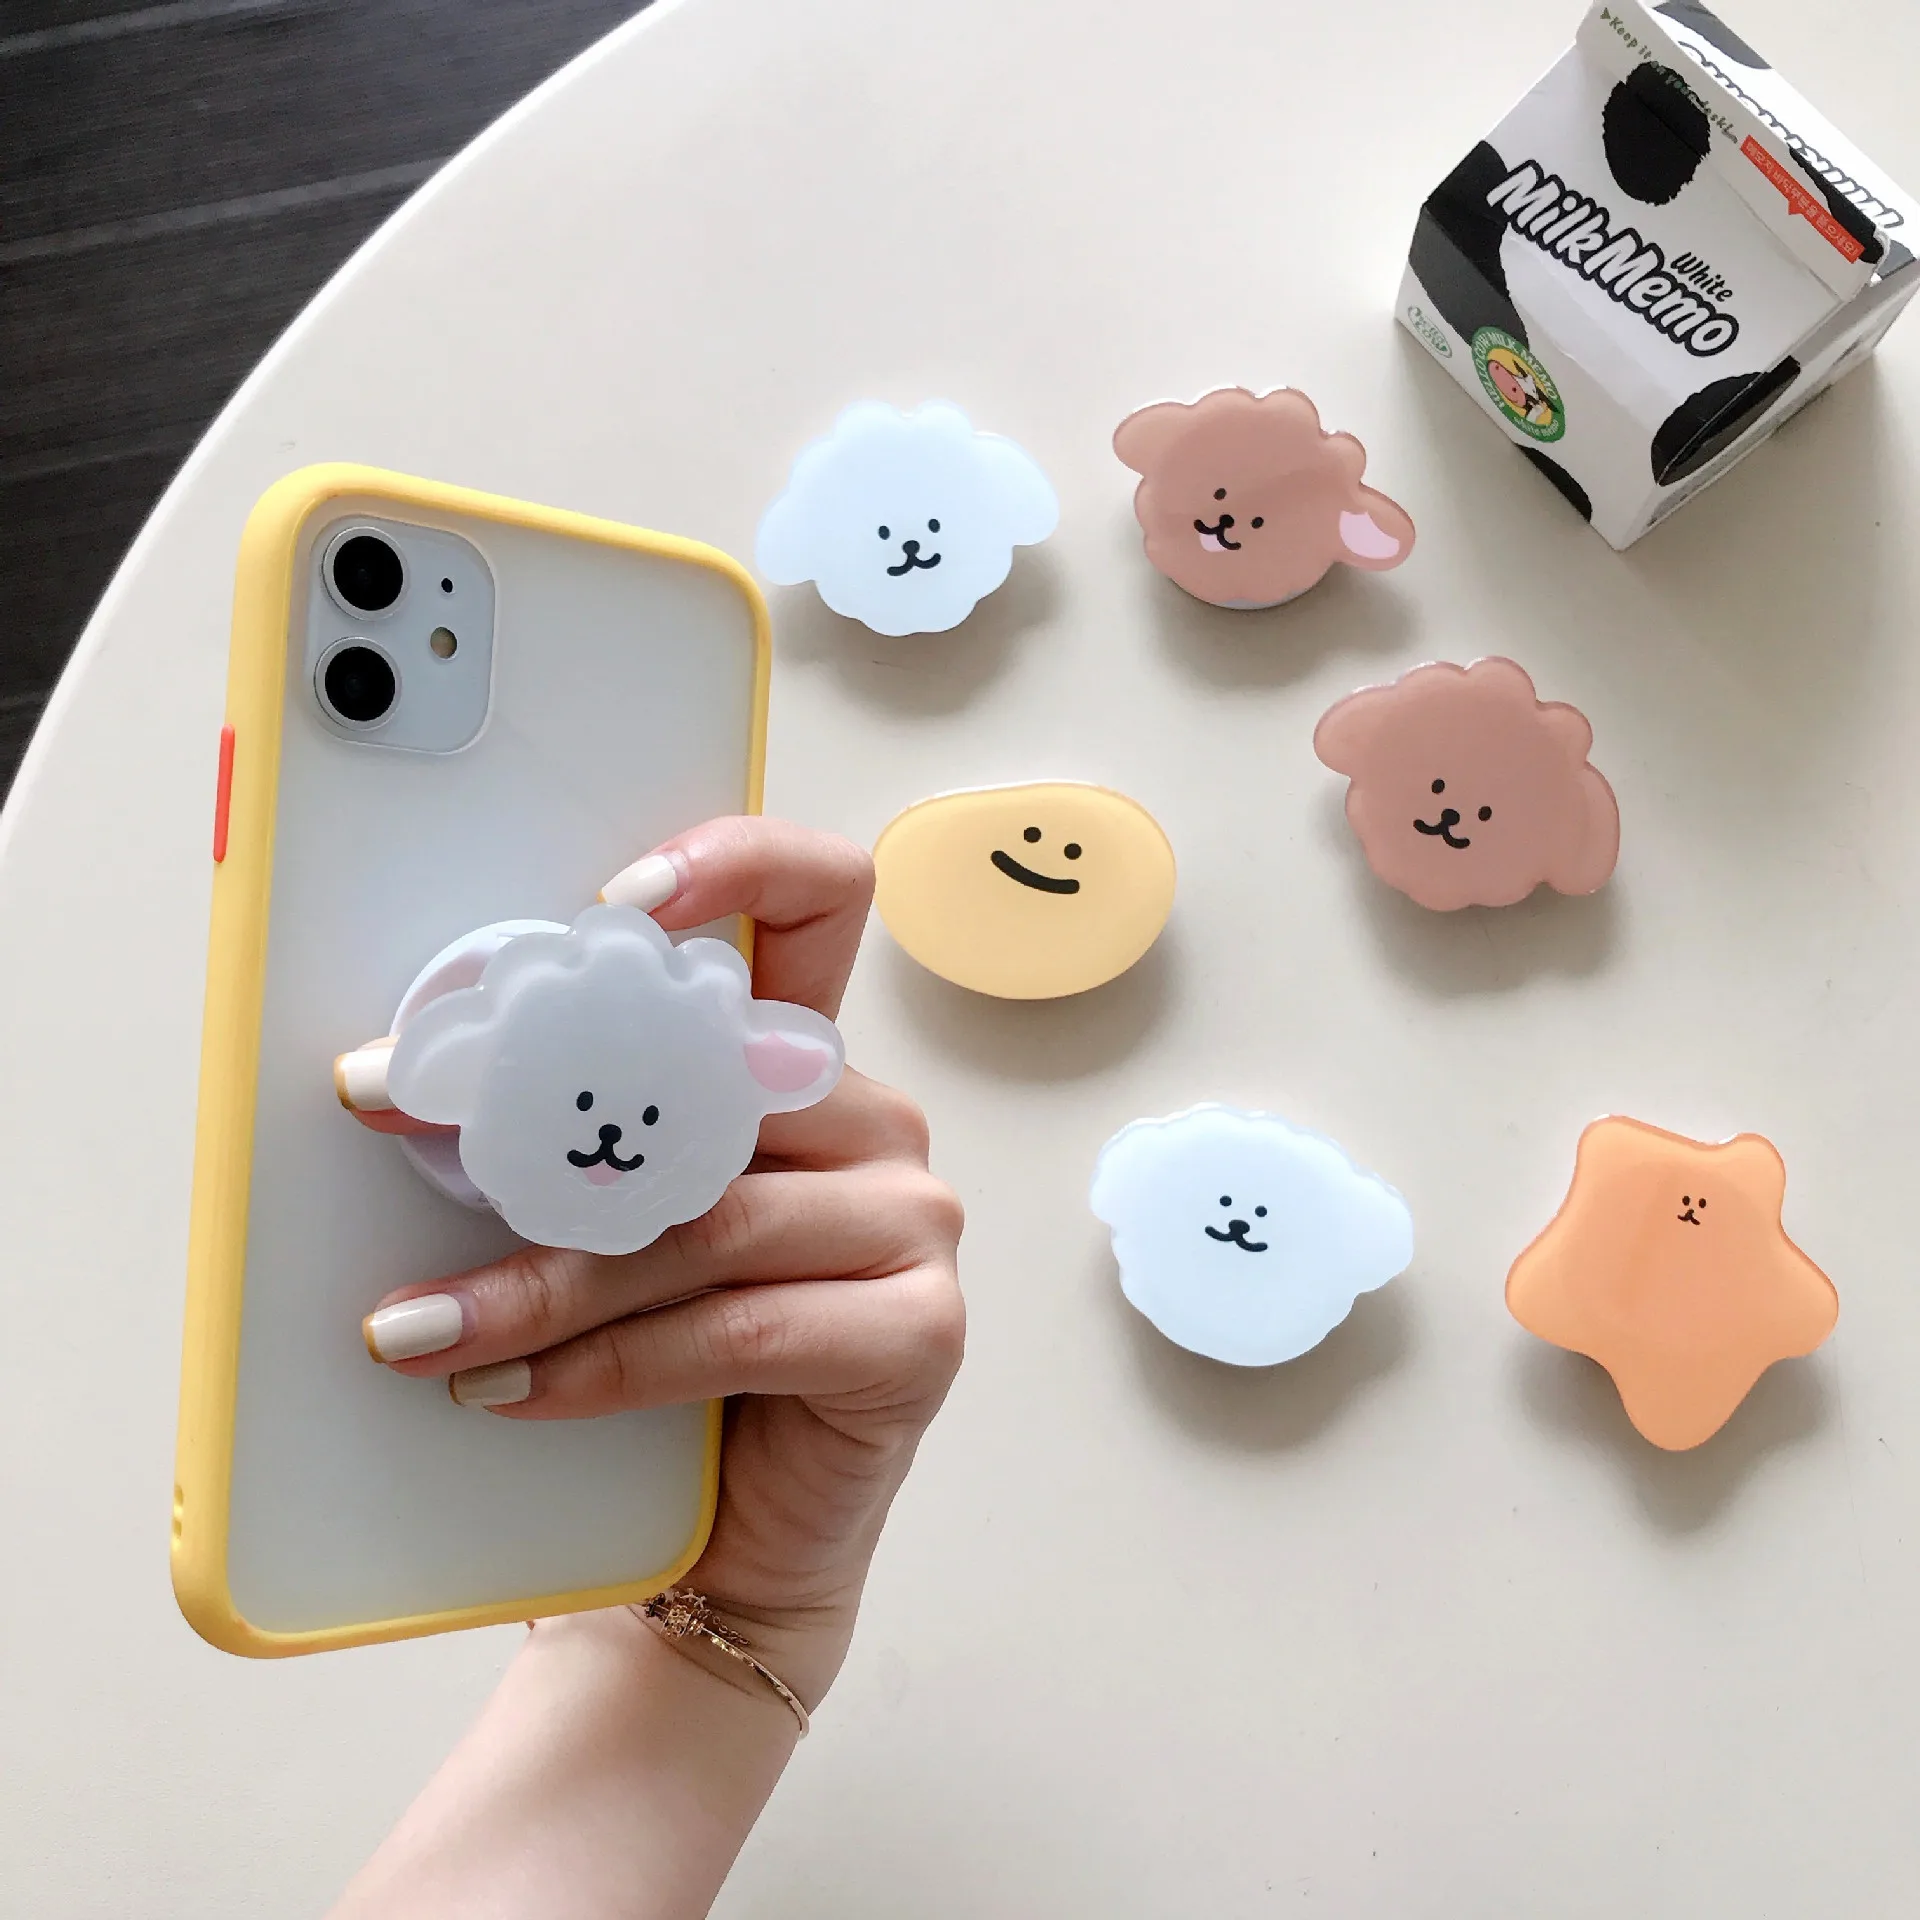 

Universal Finger Ring Stand Bracket for IPhone 11 12 Pro 5s Se 2020 6 7 8 Plus X Xr Xs Max Cute Round Extend Phone Case Holder